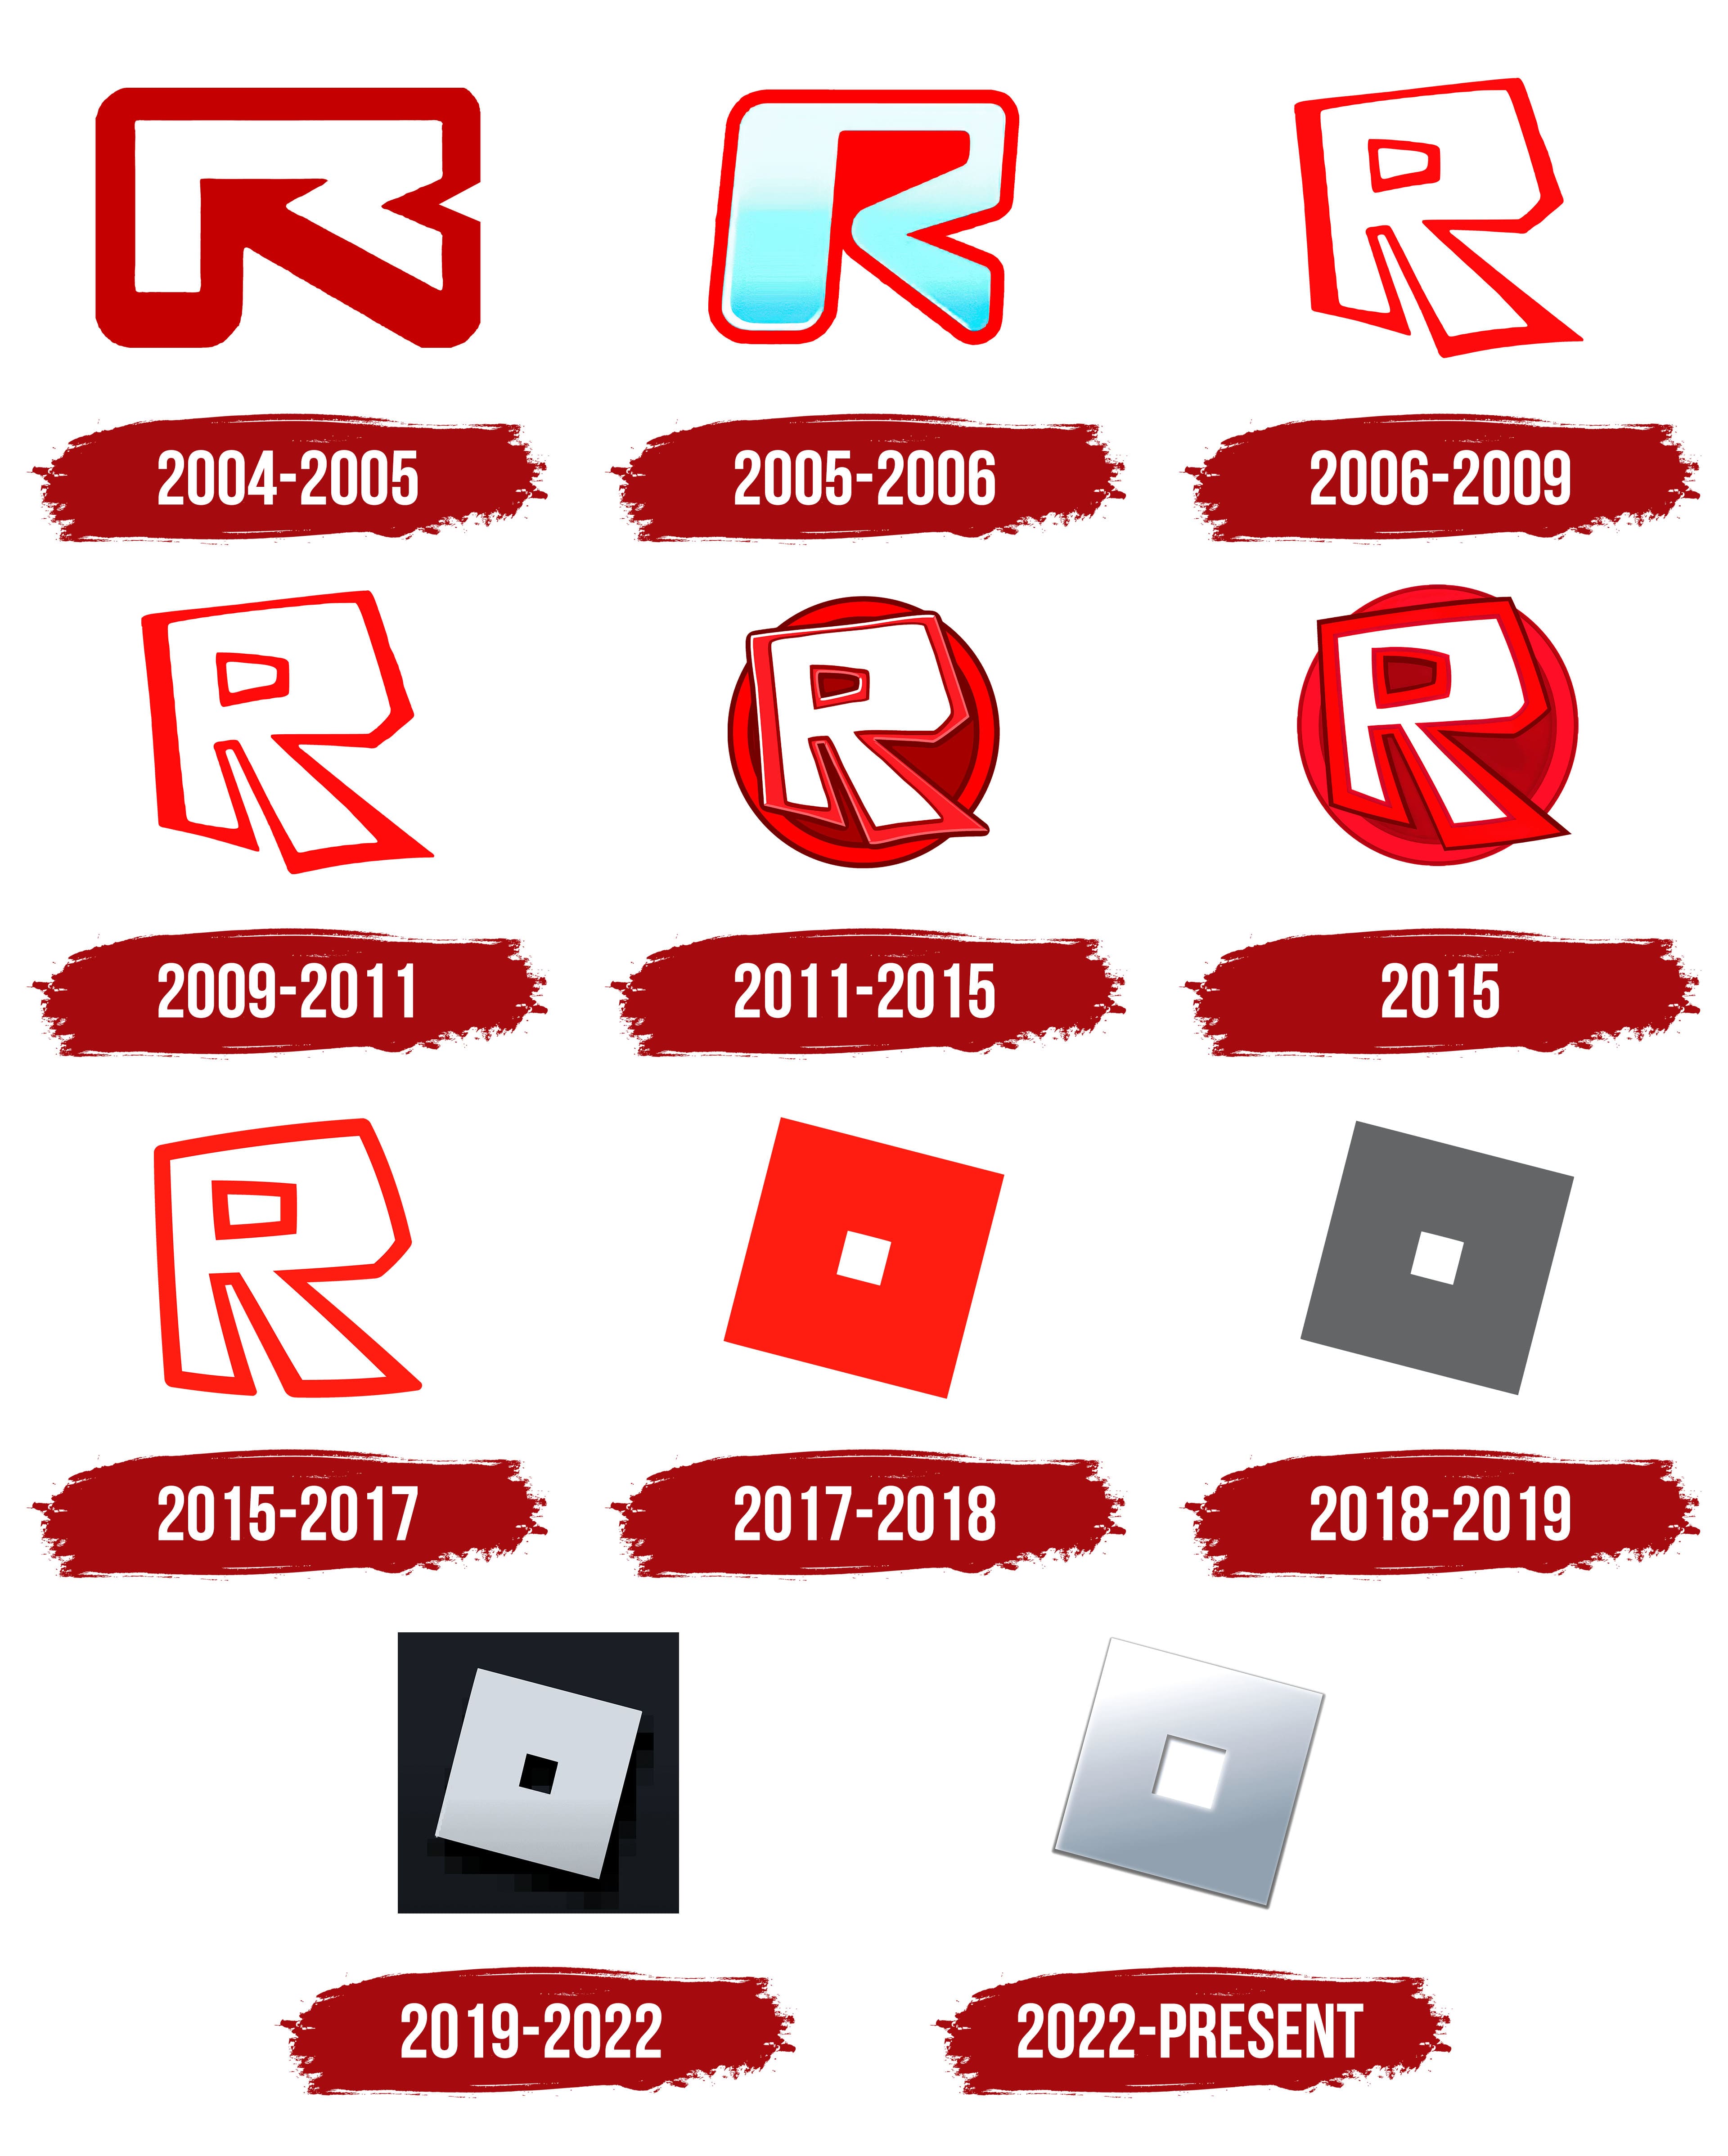 RBXevents on X: Here were all the Roblox logos before this